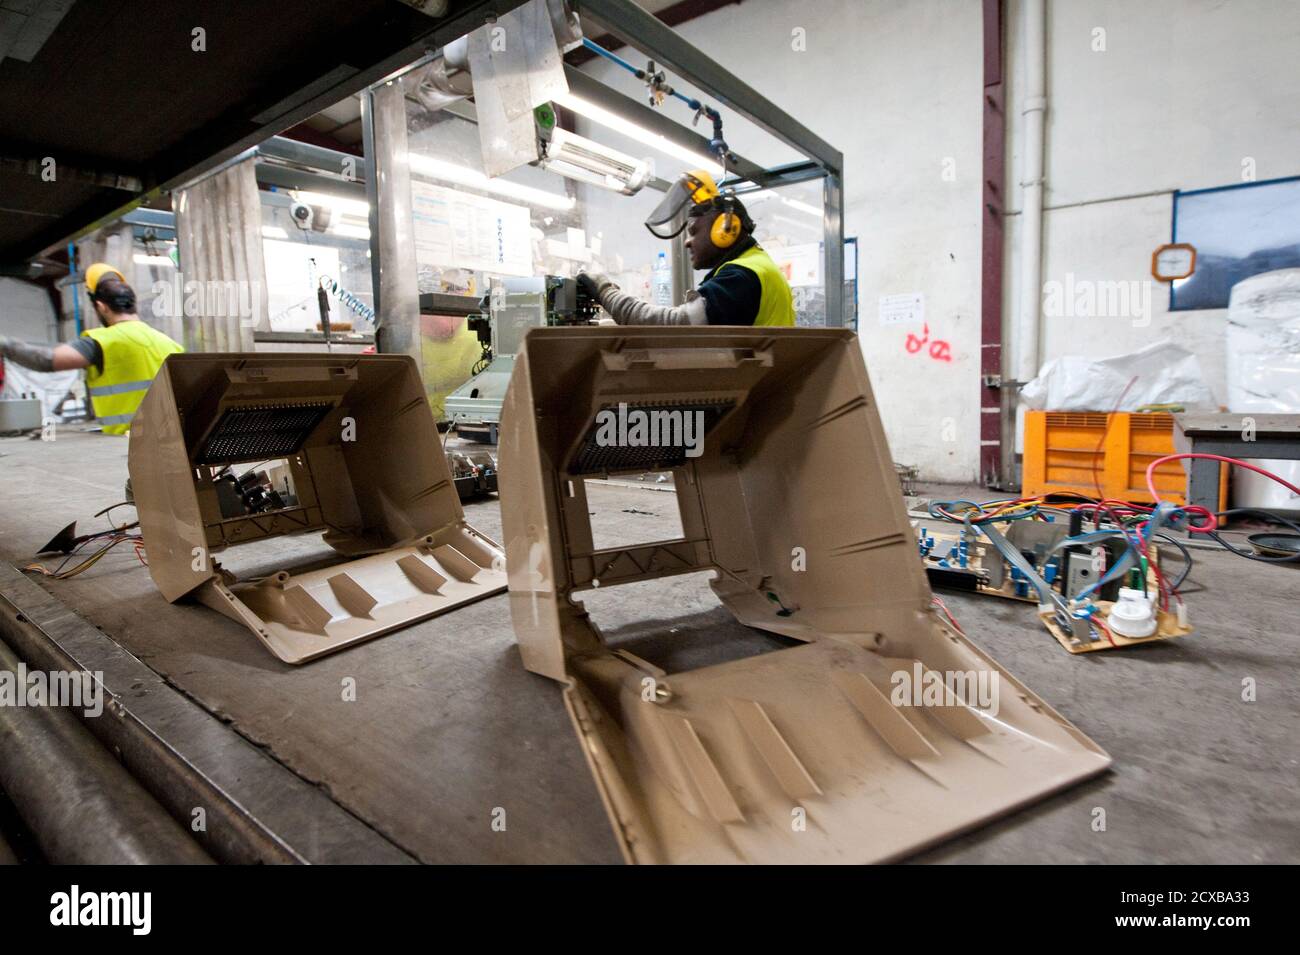 The plastic shell of a French Minitel terminal moves on a conveyor belt as it is broken down for recycling in Portet-Sur-Garonne, southwestern France May 23, 2012. The Minitel, the box-like terminal with a keyboard and monochrome screen, was introduced on the market in 1982 by telecommunications operator France Telecom and used by the French to get information as a phone directory or to purchase train tickets. Although there are between 600,000 - 700,000 of the units still in use, the Minitel service will end on June 30, 2012.   REUTERS/Bruno Martin   (FRANCE - Tags: SCIENCE TECHNOLOGY ENVIRON Stock Photo